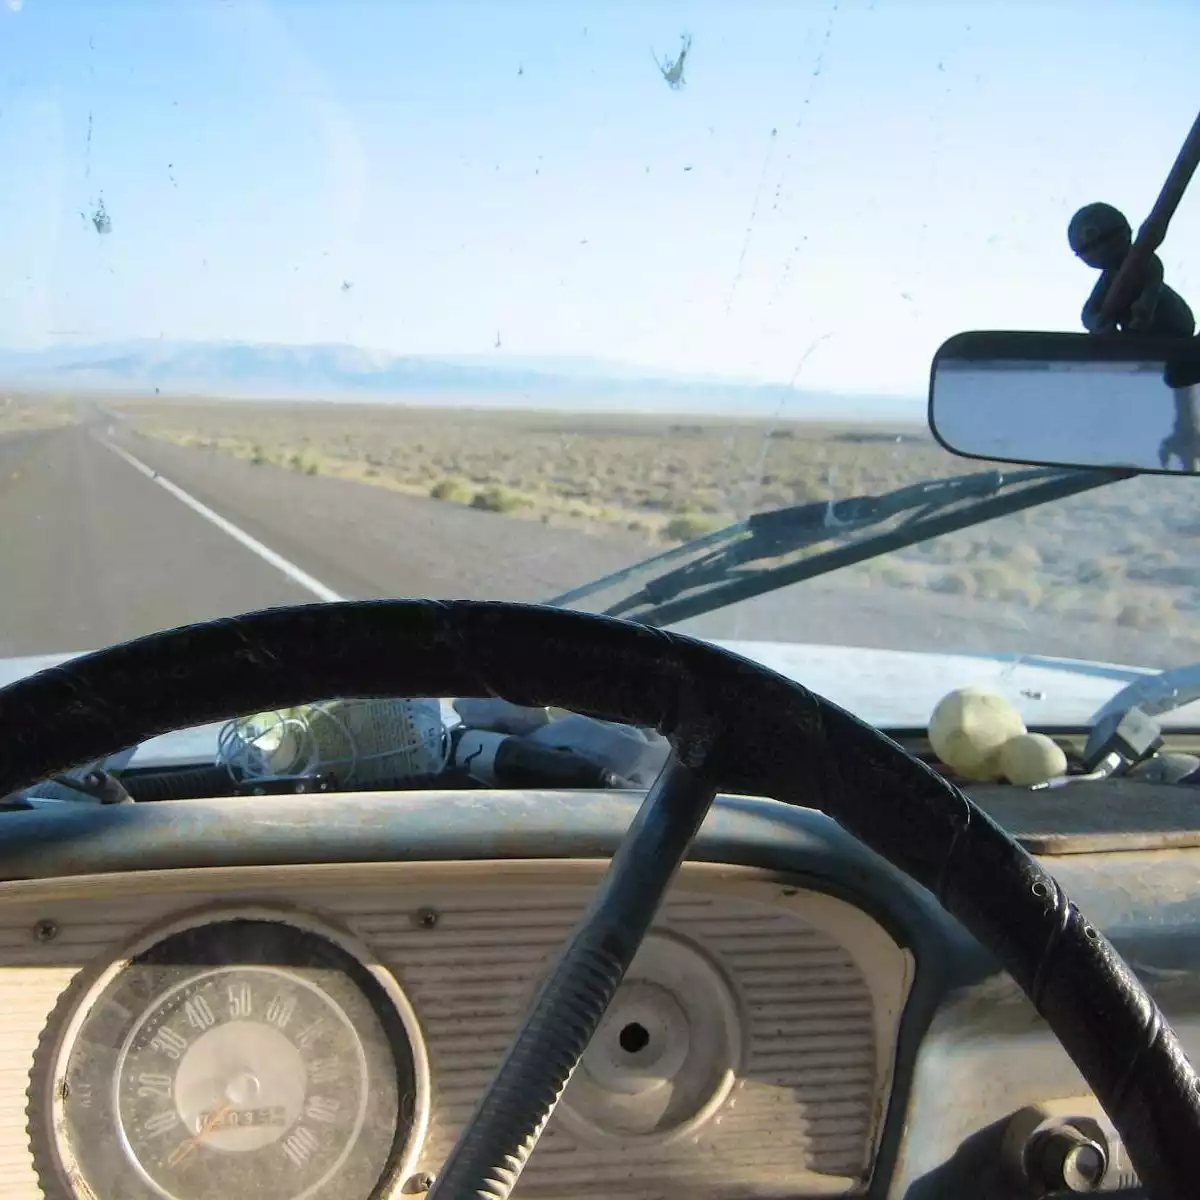 Point of view of driving an old truck on a two lane highway into vast scenery. A thin out-of-round steering wheel, dust-covered speedometer, strange objects on a dirty steel dashboard, comet shaped dead bugs, then the road stretching into a vanishing point under far-away mountains.